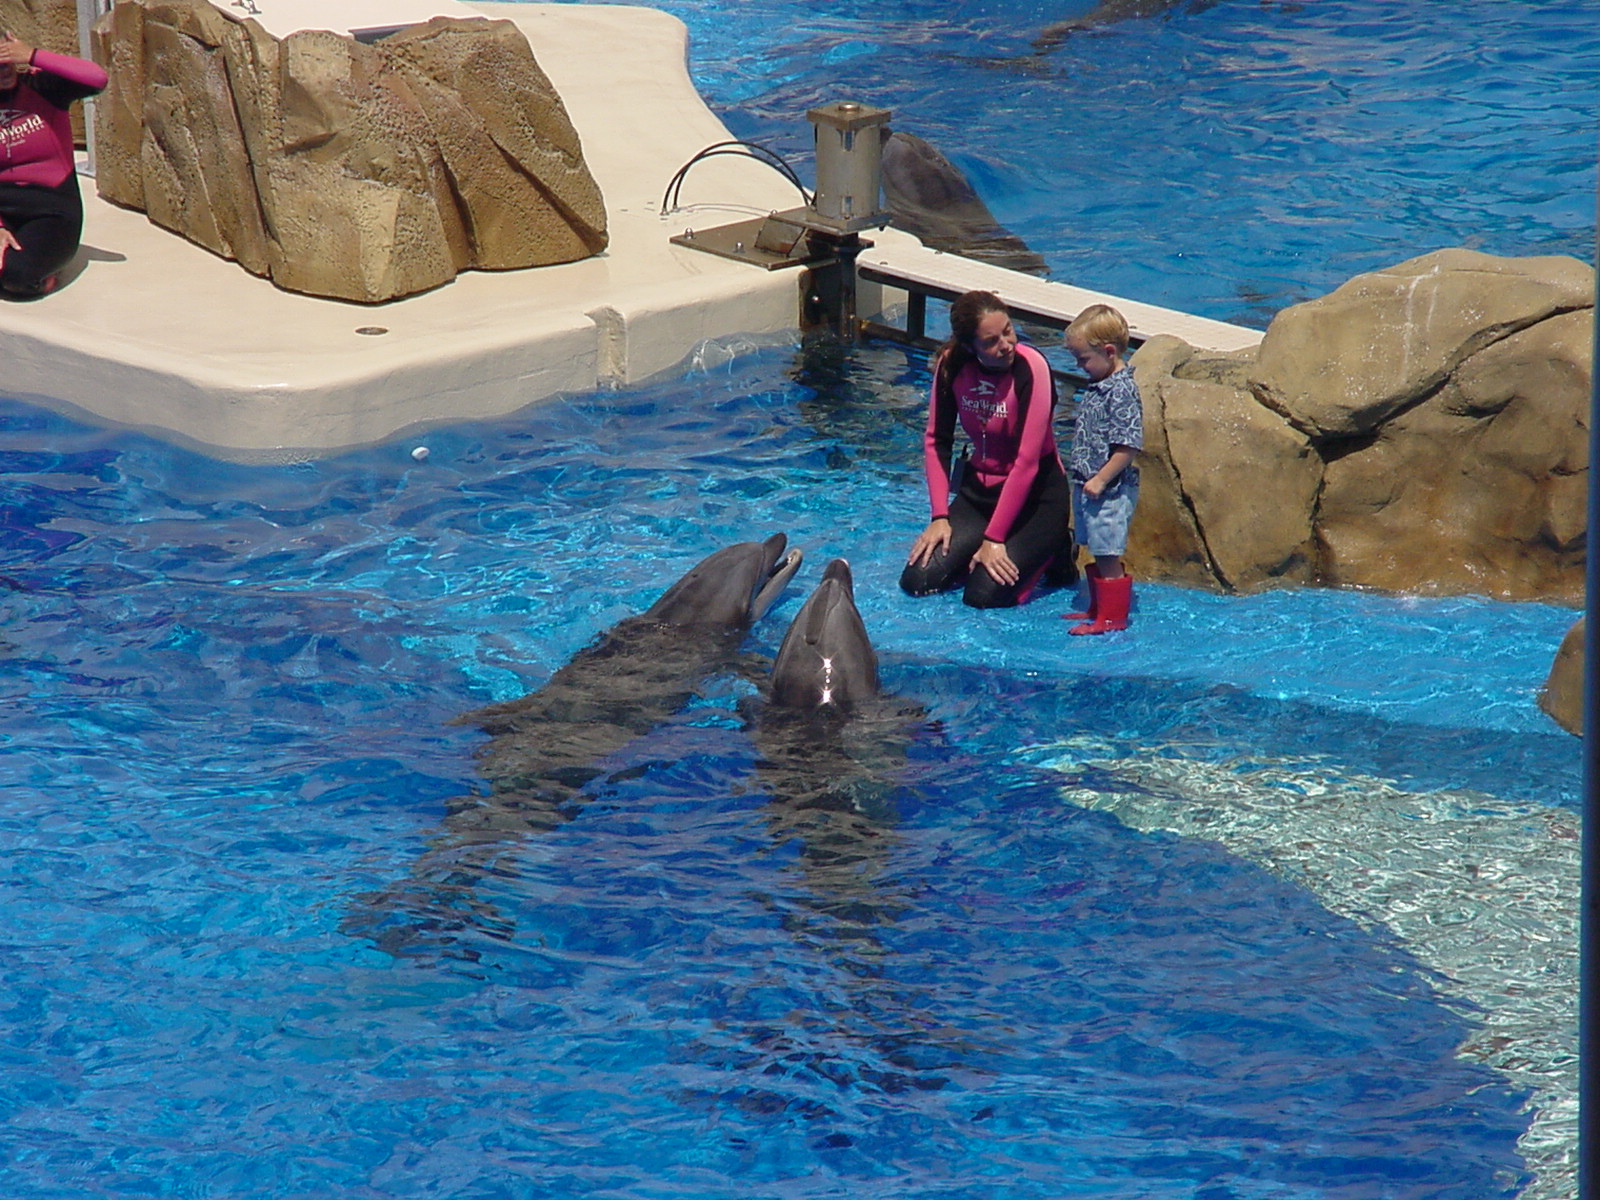 SeaWorld Orlando Dolphins interacting with trainer and small boy at side of the dolphin tank